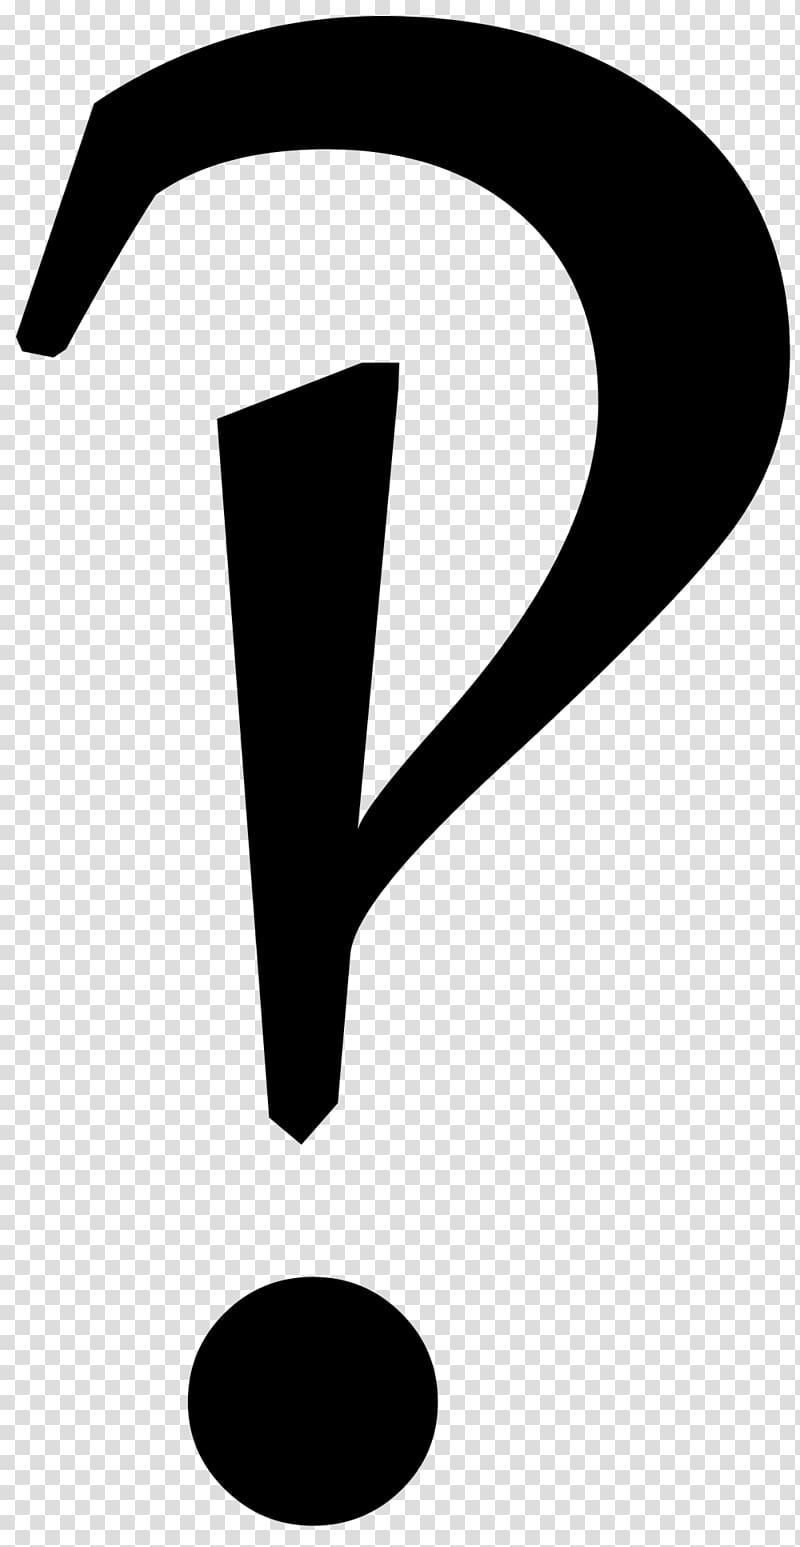 Interrobang Exclamation mark Question mark Punctuation Rhetorical question, others transparent background PNG clipart